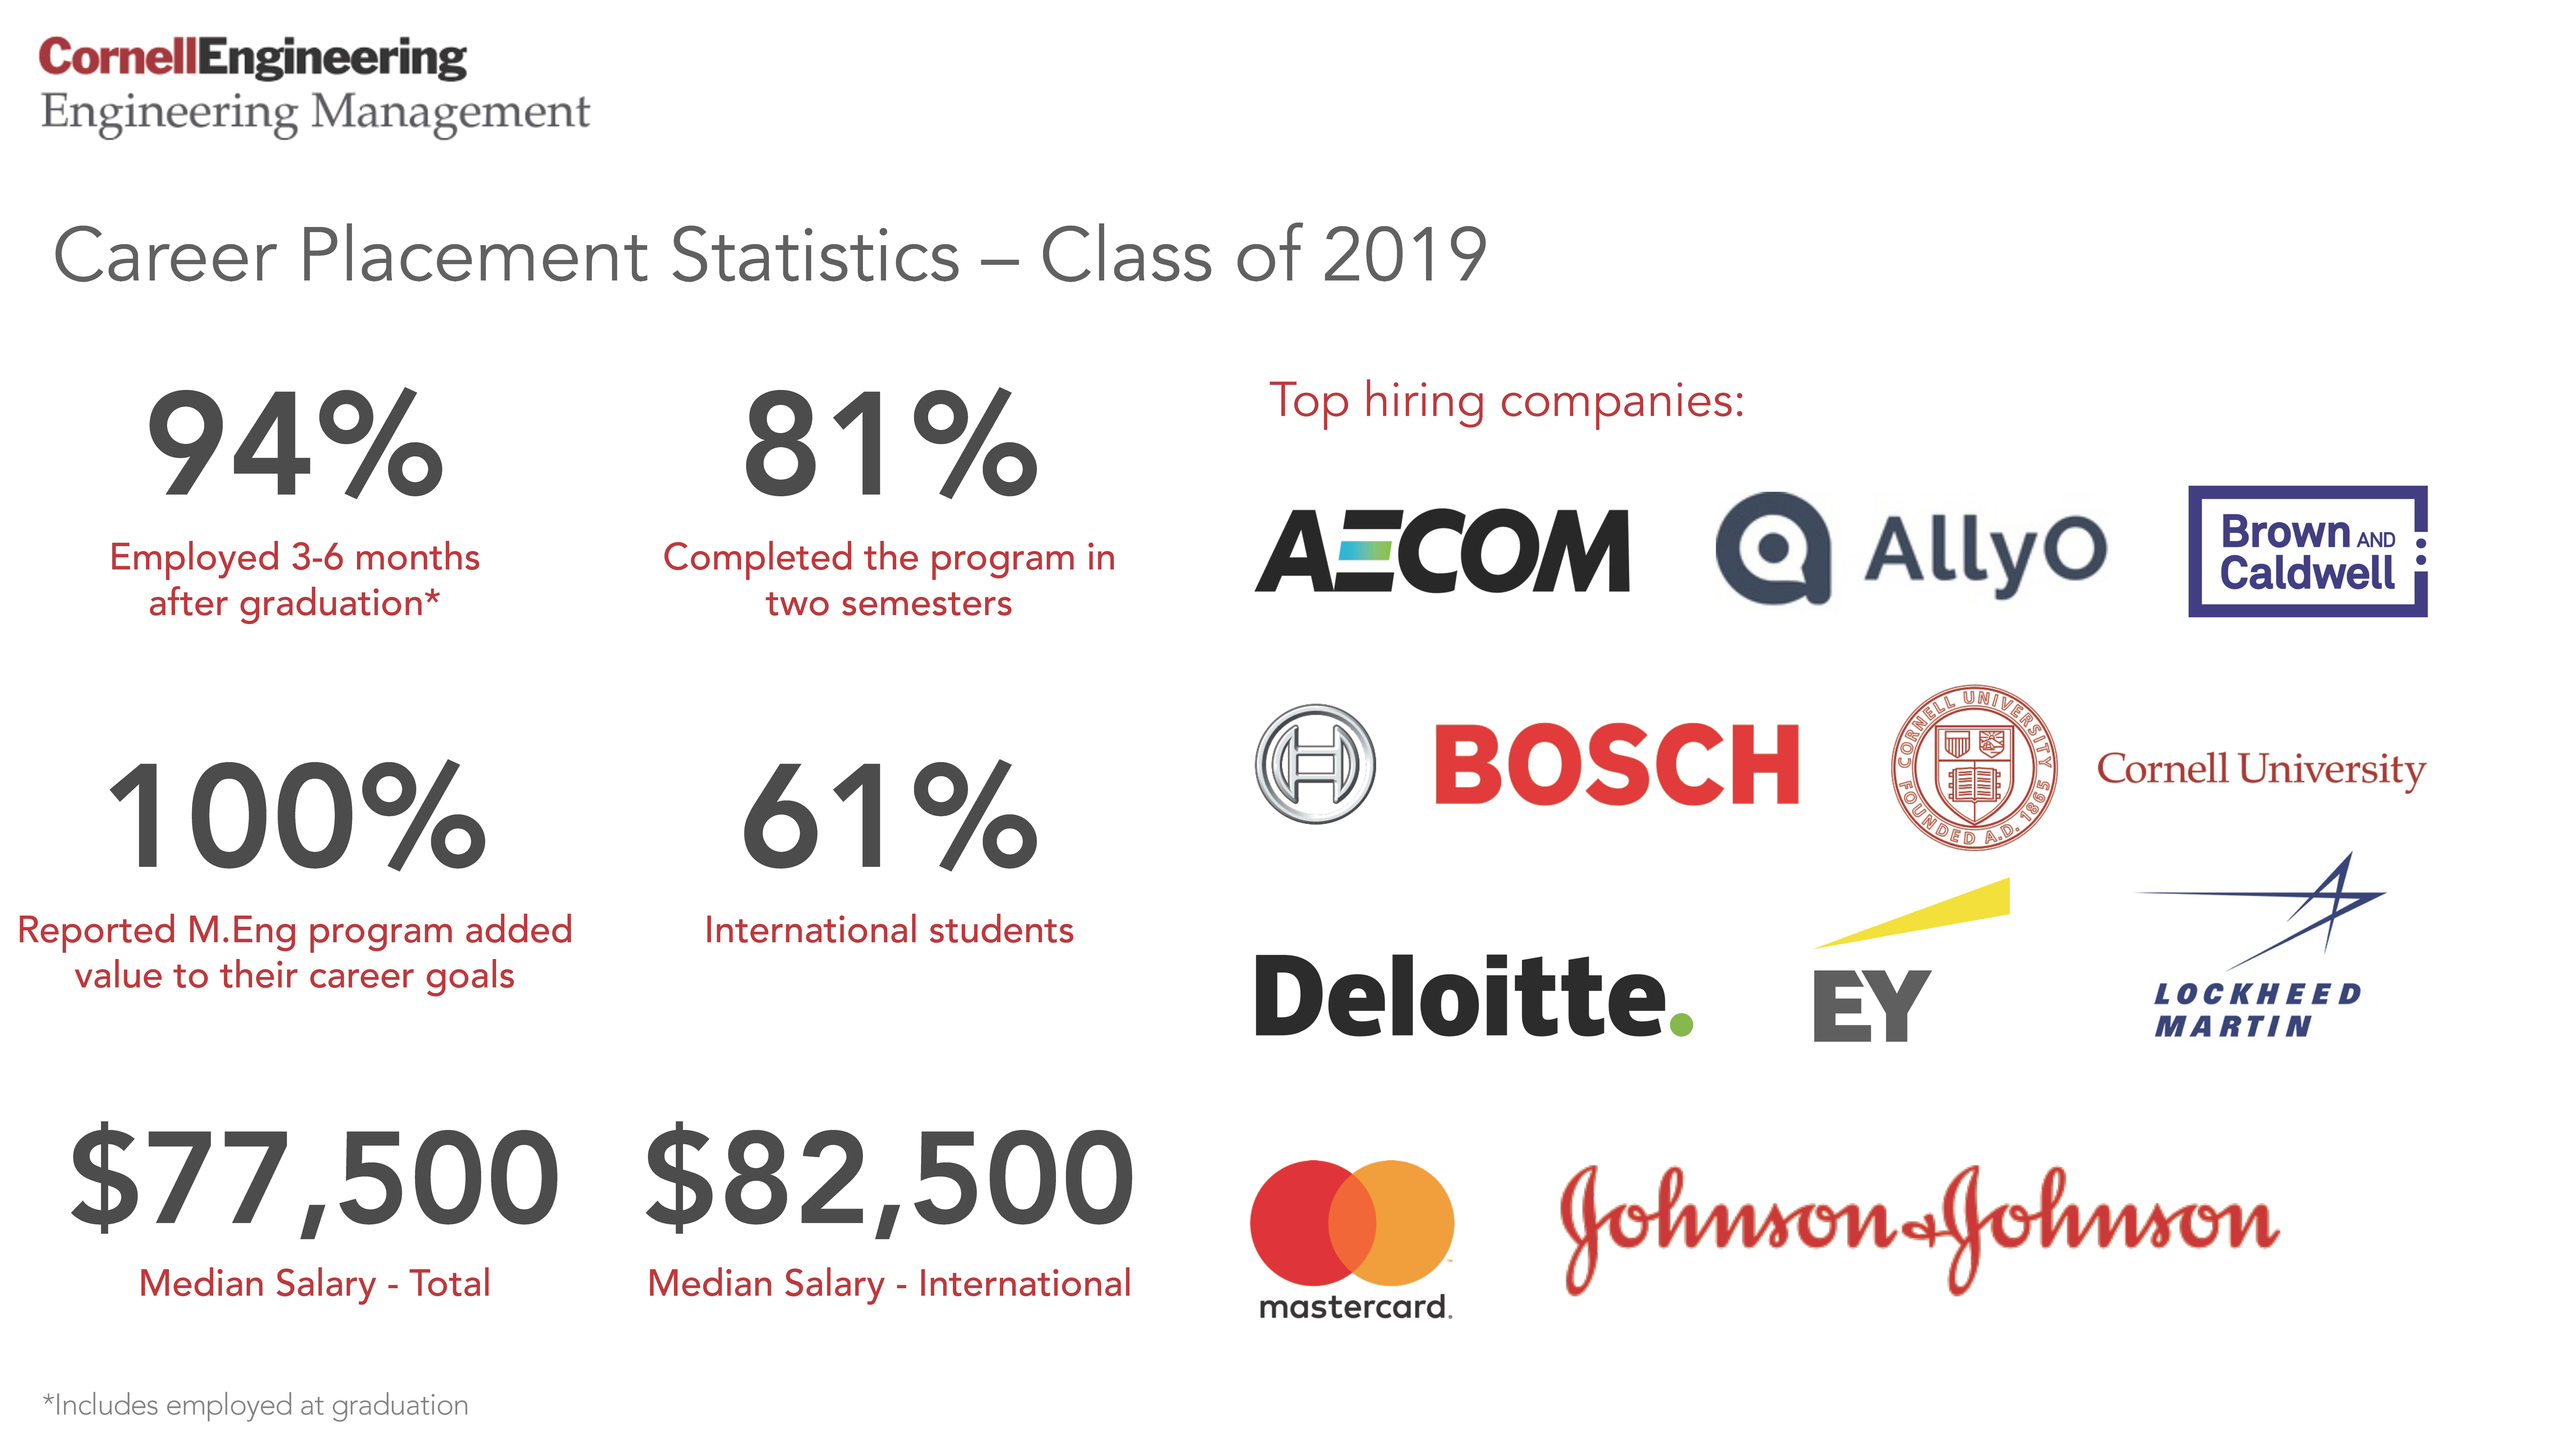 Career Placement Statistics – Class of 2019  94% Employed 3-6 months after graduation* 81% Completed the program in two semesters 100% Reported M.Eng. program added value to their career goals 61% International students $77,500 Median Salary – Total $82,500 Median Salary – International  *Includes employed at graduation, data incomplete for 3-6 months after graduation  Top hiring companies AECOM AllyO Brown and Caldwell Bosch Cornell University Deloitte EY Lockheed Martin Mastercard Johnson & Johnson